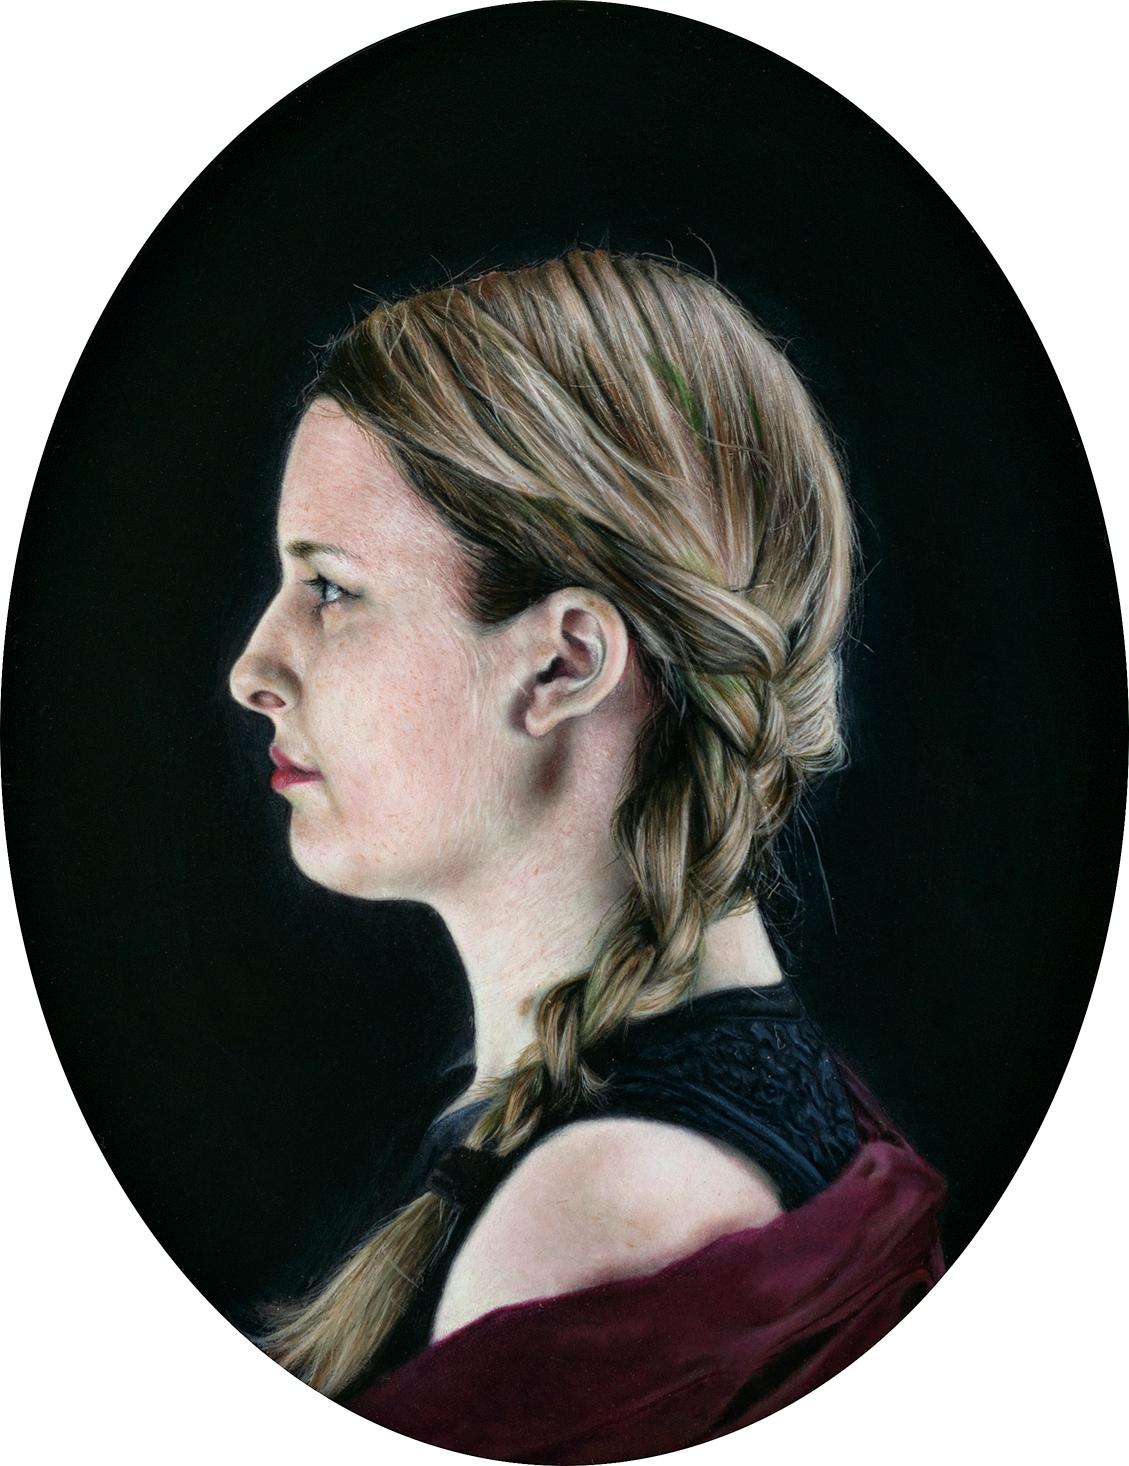 Joanne in Profile - Photorealist Oil Painting on Oval Panel of Woman in Profile